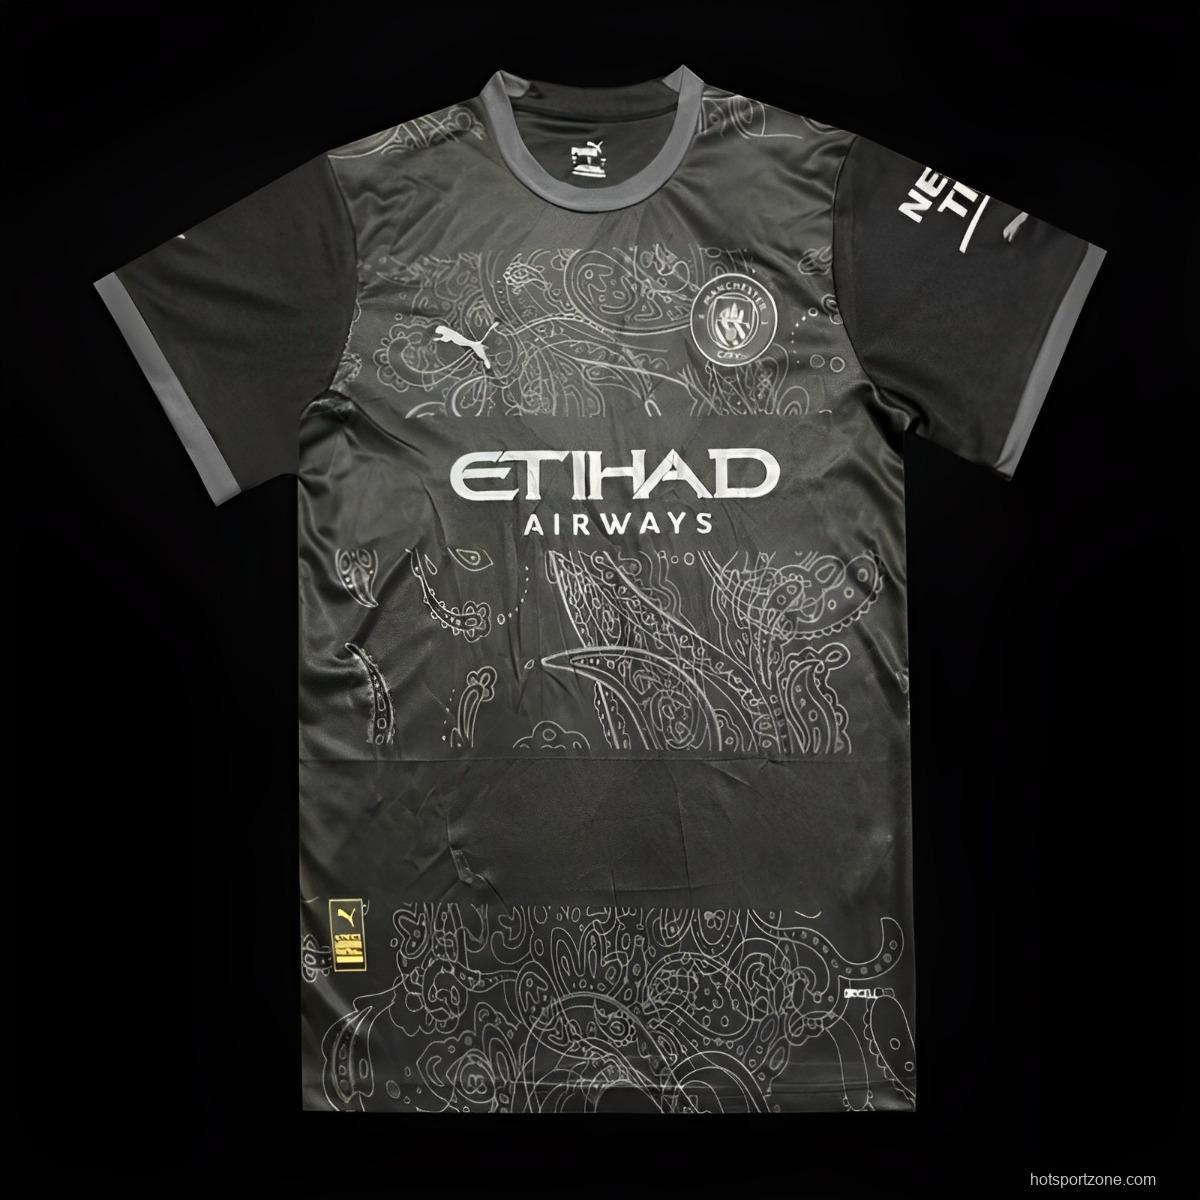 24/25 Manchester City Puma Year of the Dragon Black Jersey